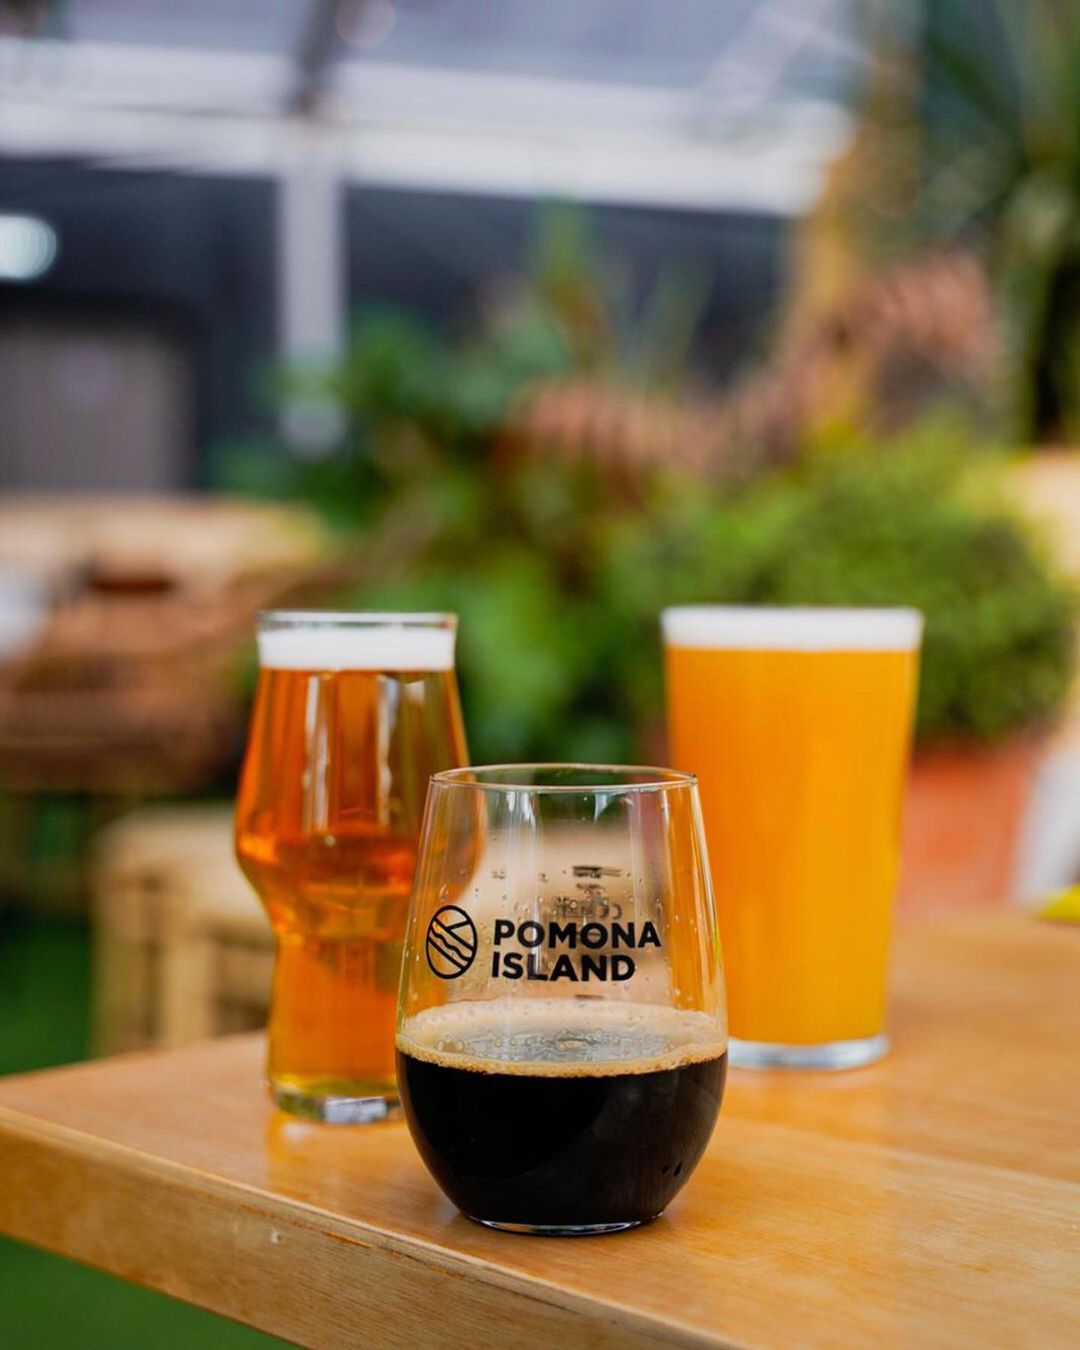 Manchester food and drink festival to give out 2,000 free pints this weekend, The Manc